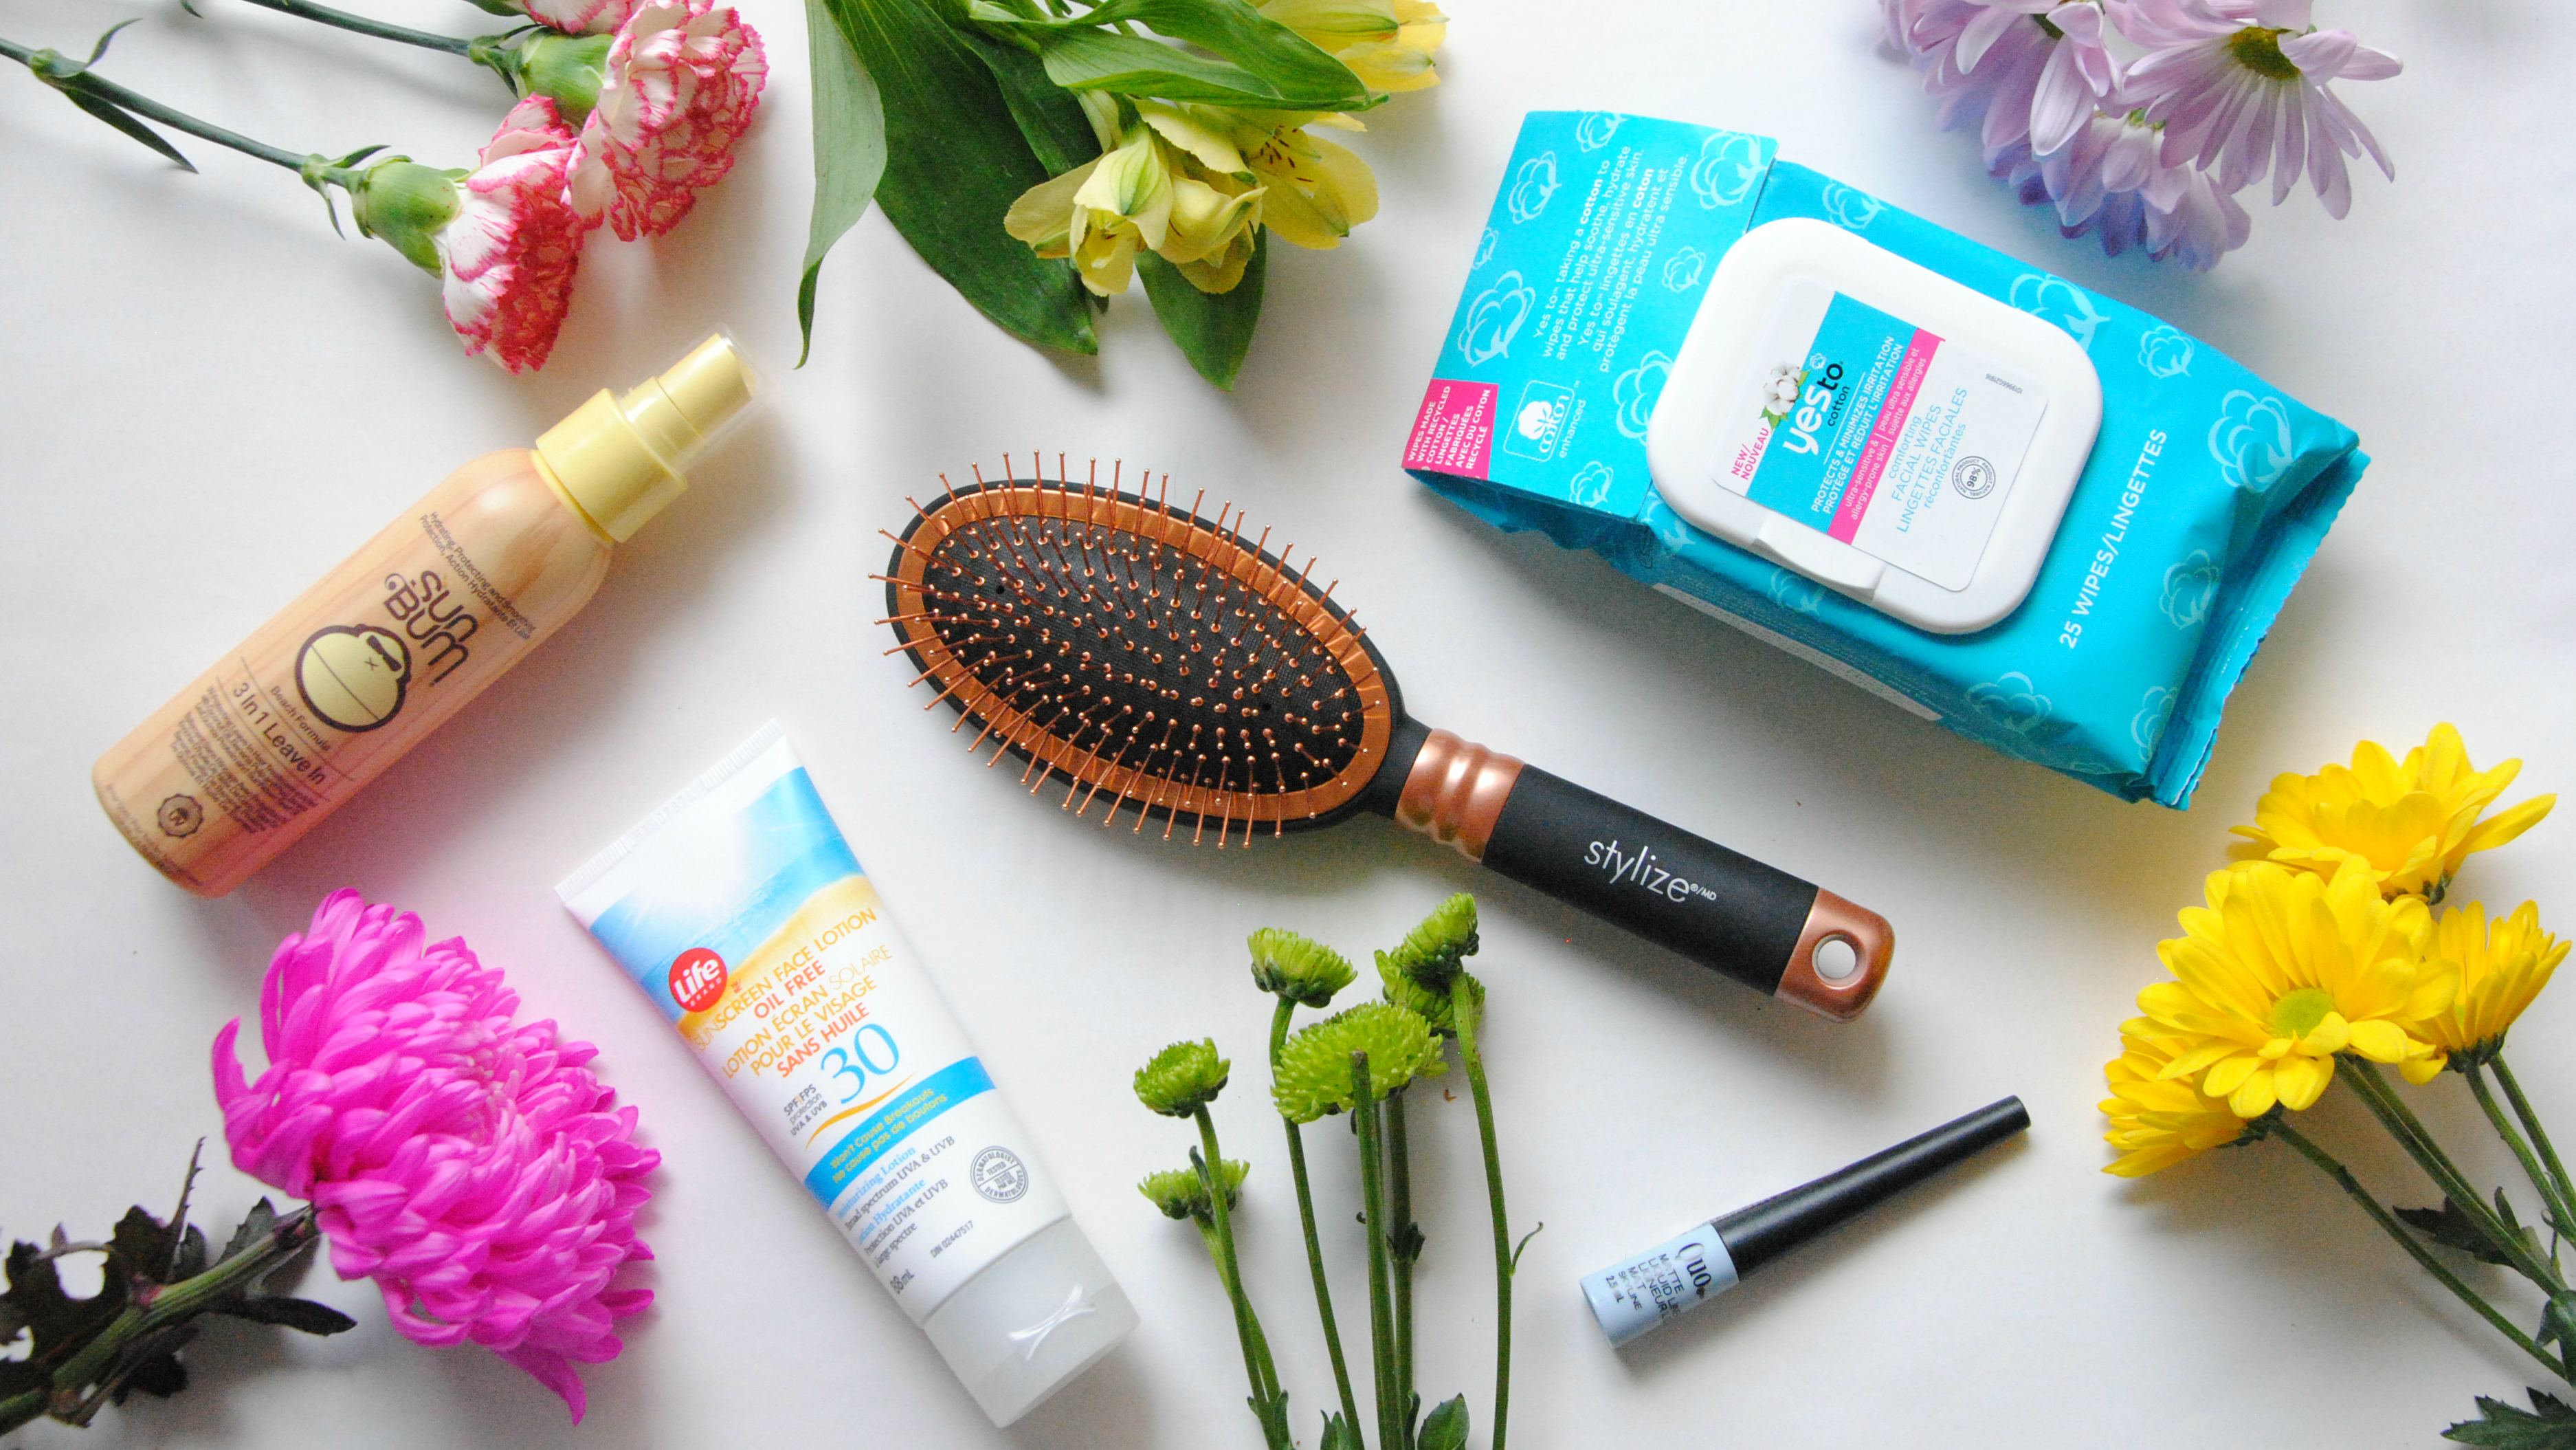 Ready to glow: Top 5 summer products from Shoppers Drug Mart